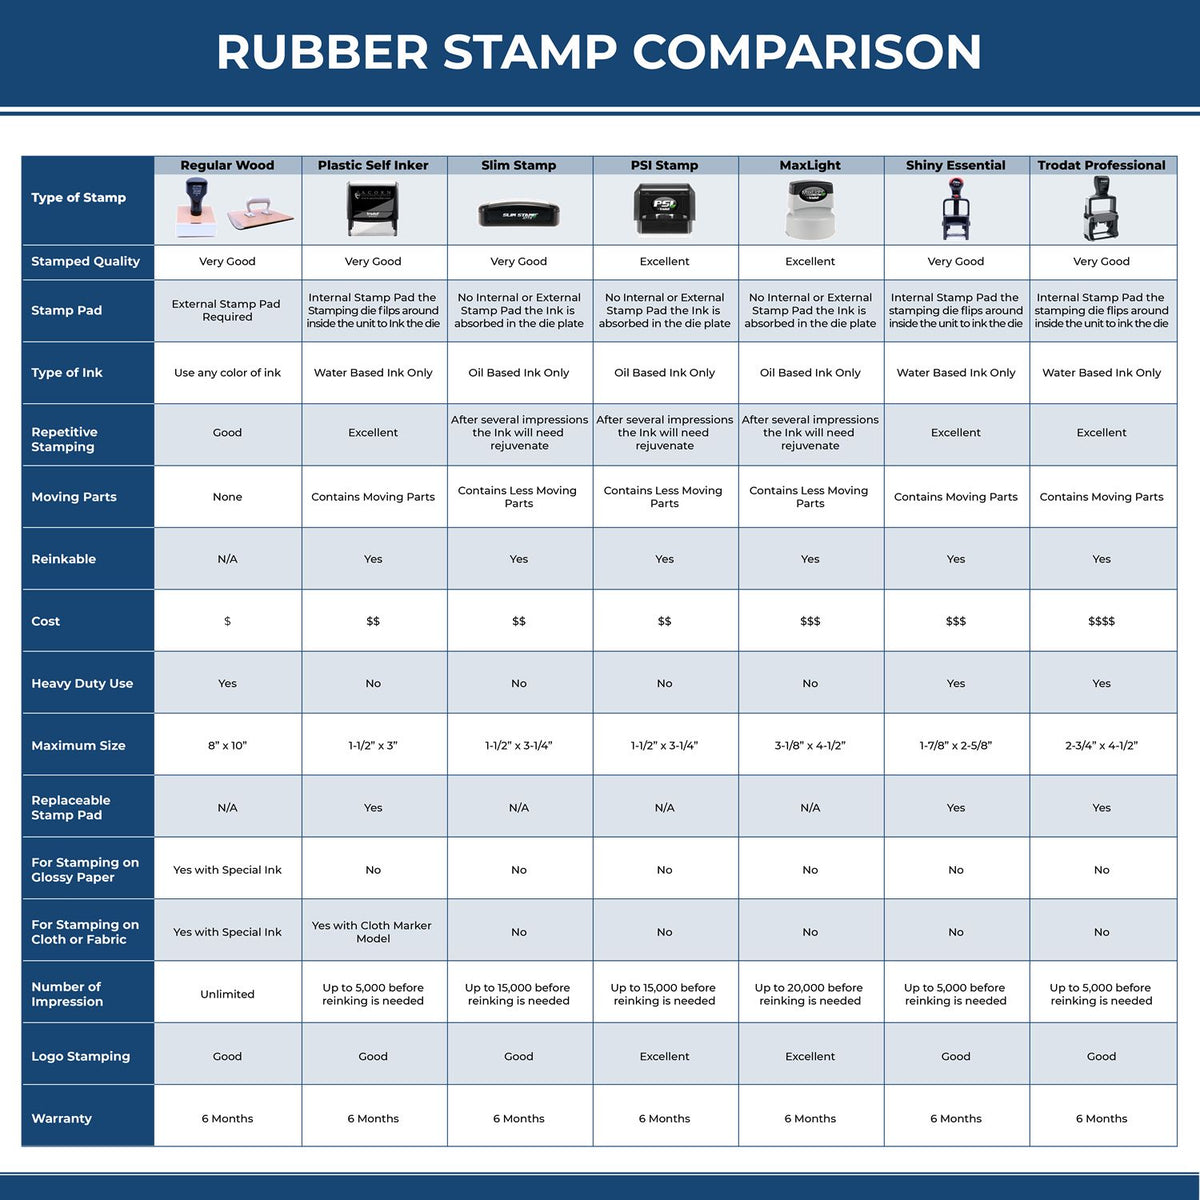 A comparison chart for the different types of mount models available for the Super Slim West Virginia Notary Public Stamp.